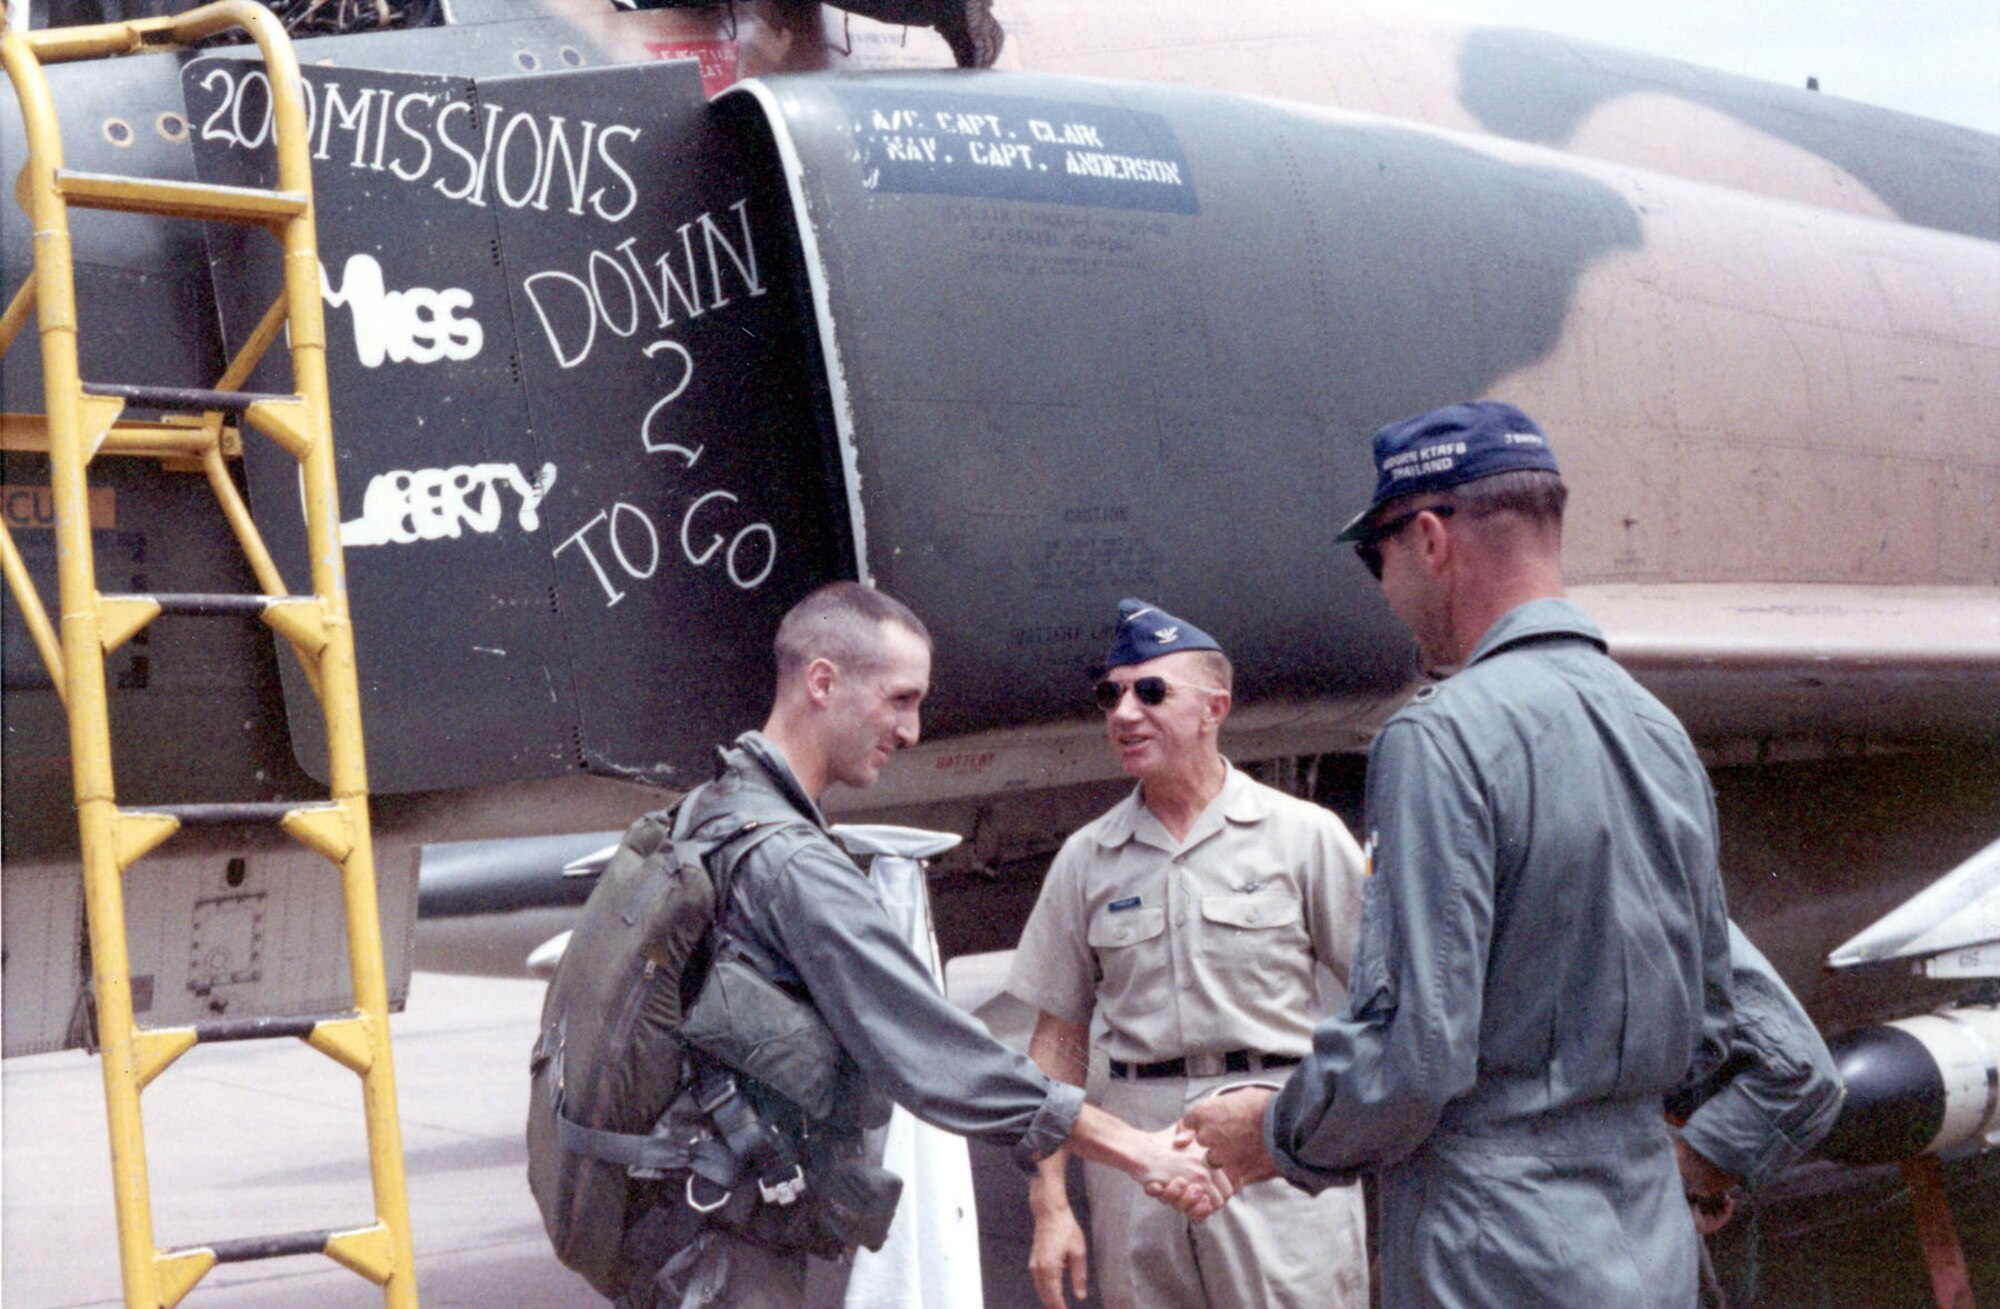 RF-4C pilot Capt. Robert Clark being congratulated after finishing his second 100-mission RF-4C tour. The “2 to go” on his aircraft represented his wish to fly two more 100-mission tours. He later flew missions as a B-52G pilot over North Vietnam during Linebacker II. (U.S. Air Force photo)